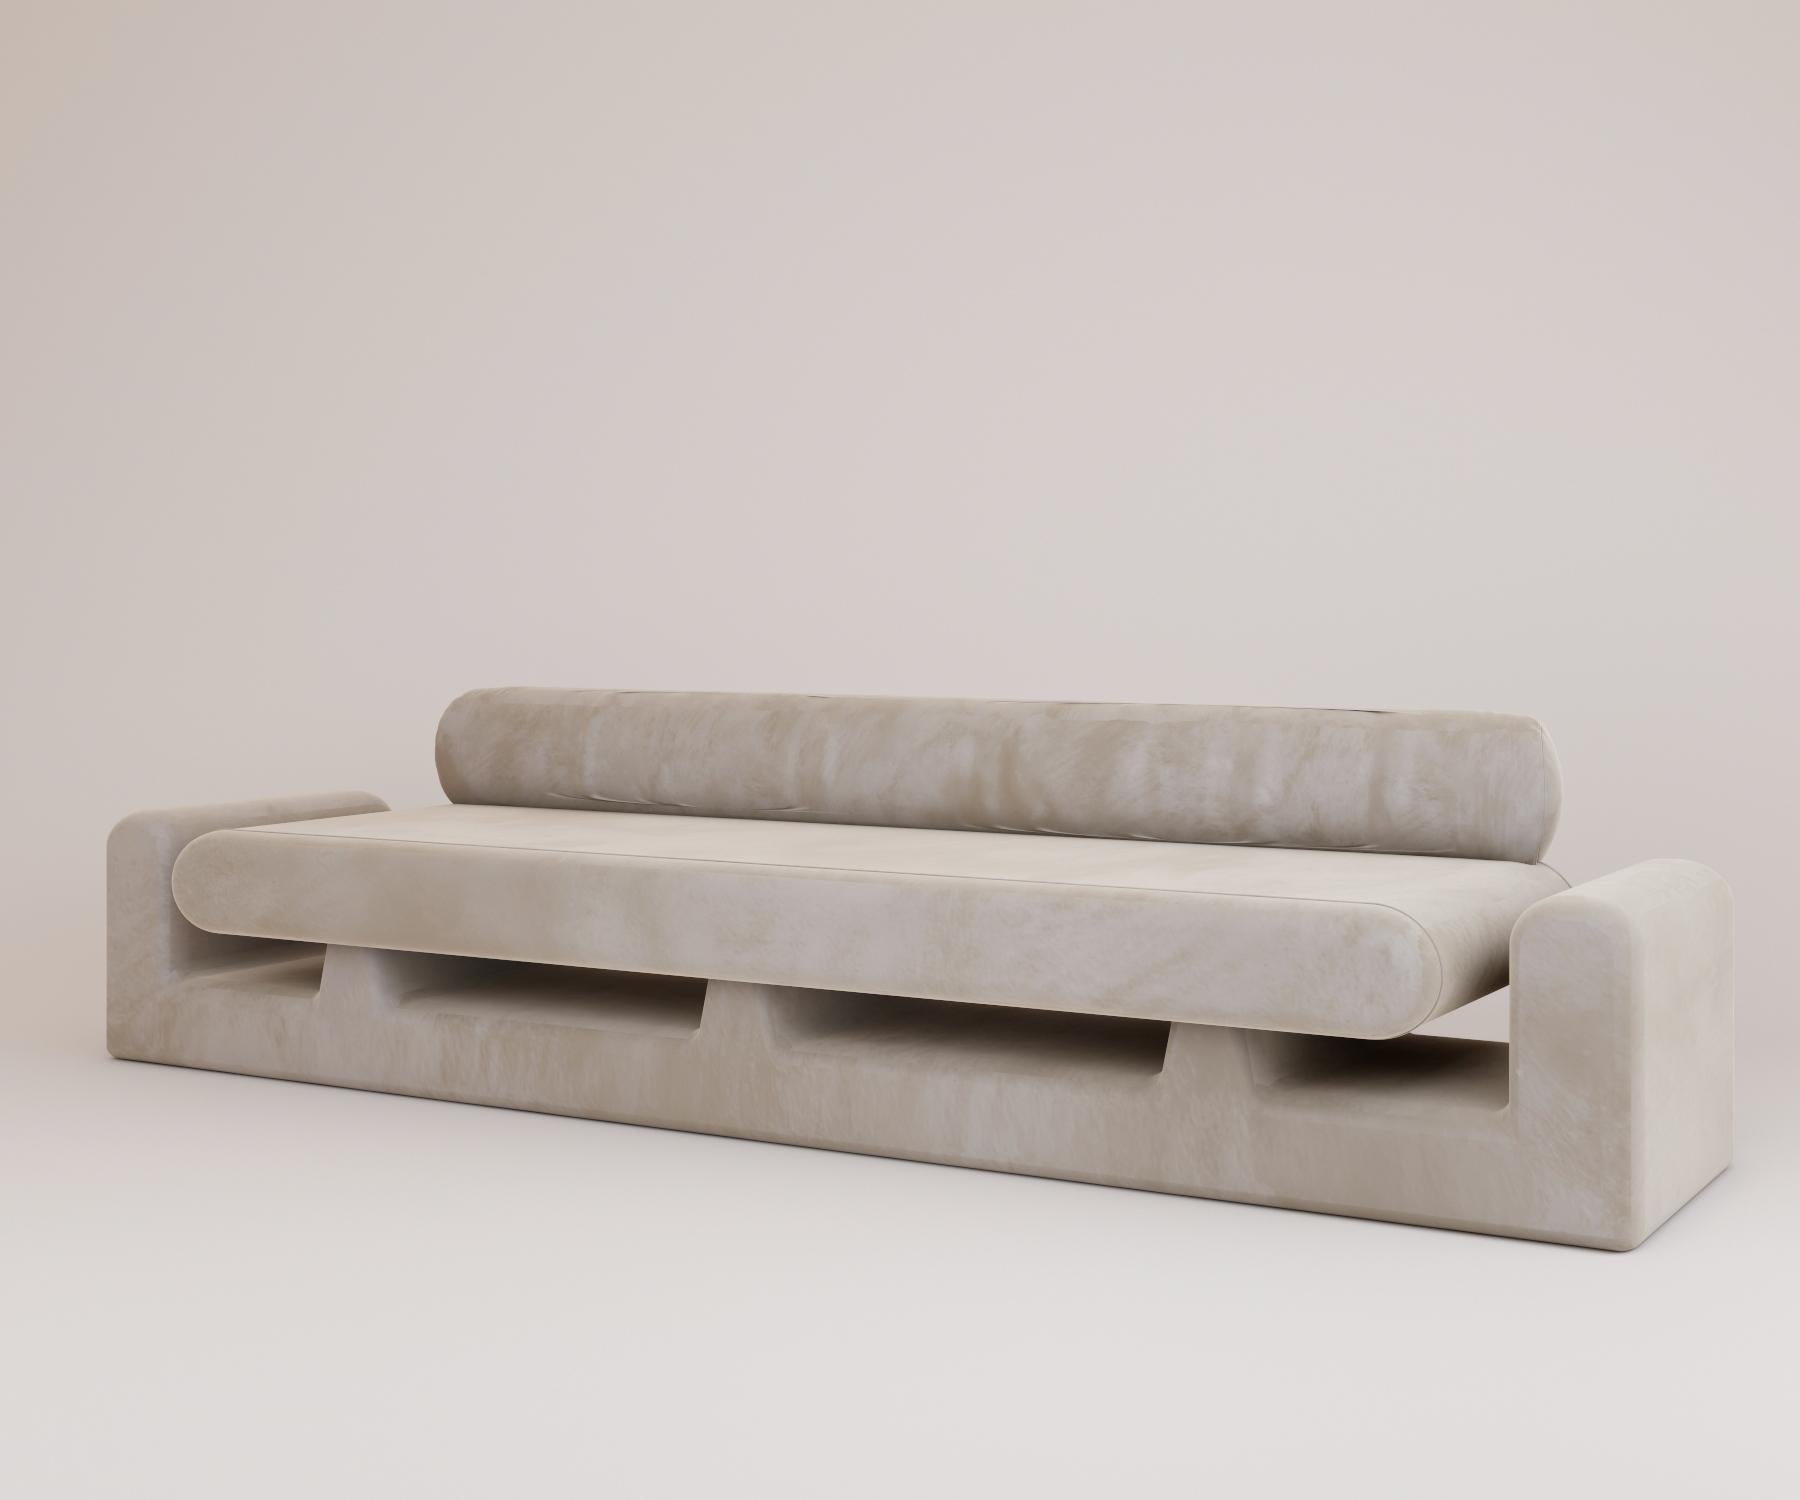 Modern Hug Sofa Upholstered, Chubby Arms by Rejo Studio For Sale